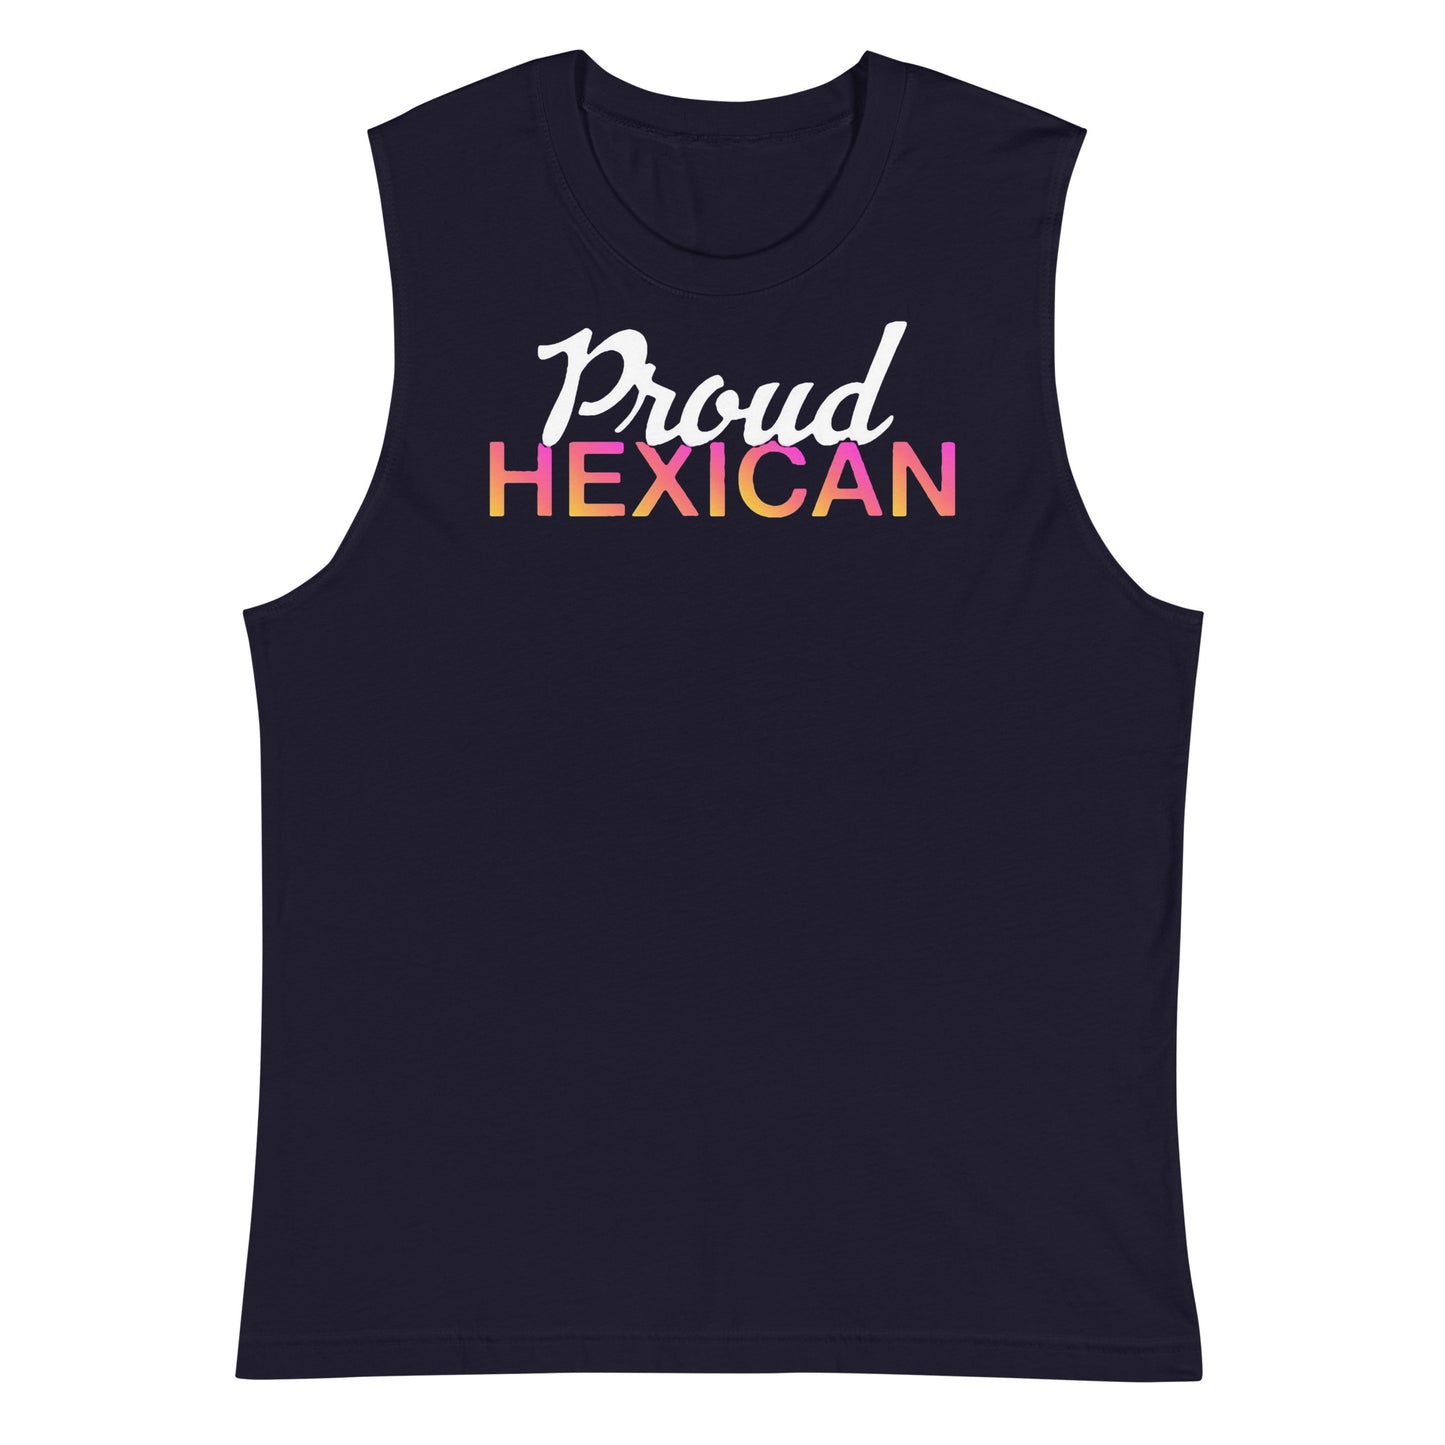 Proud Hexican Unisex Muscle Shirt